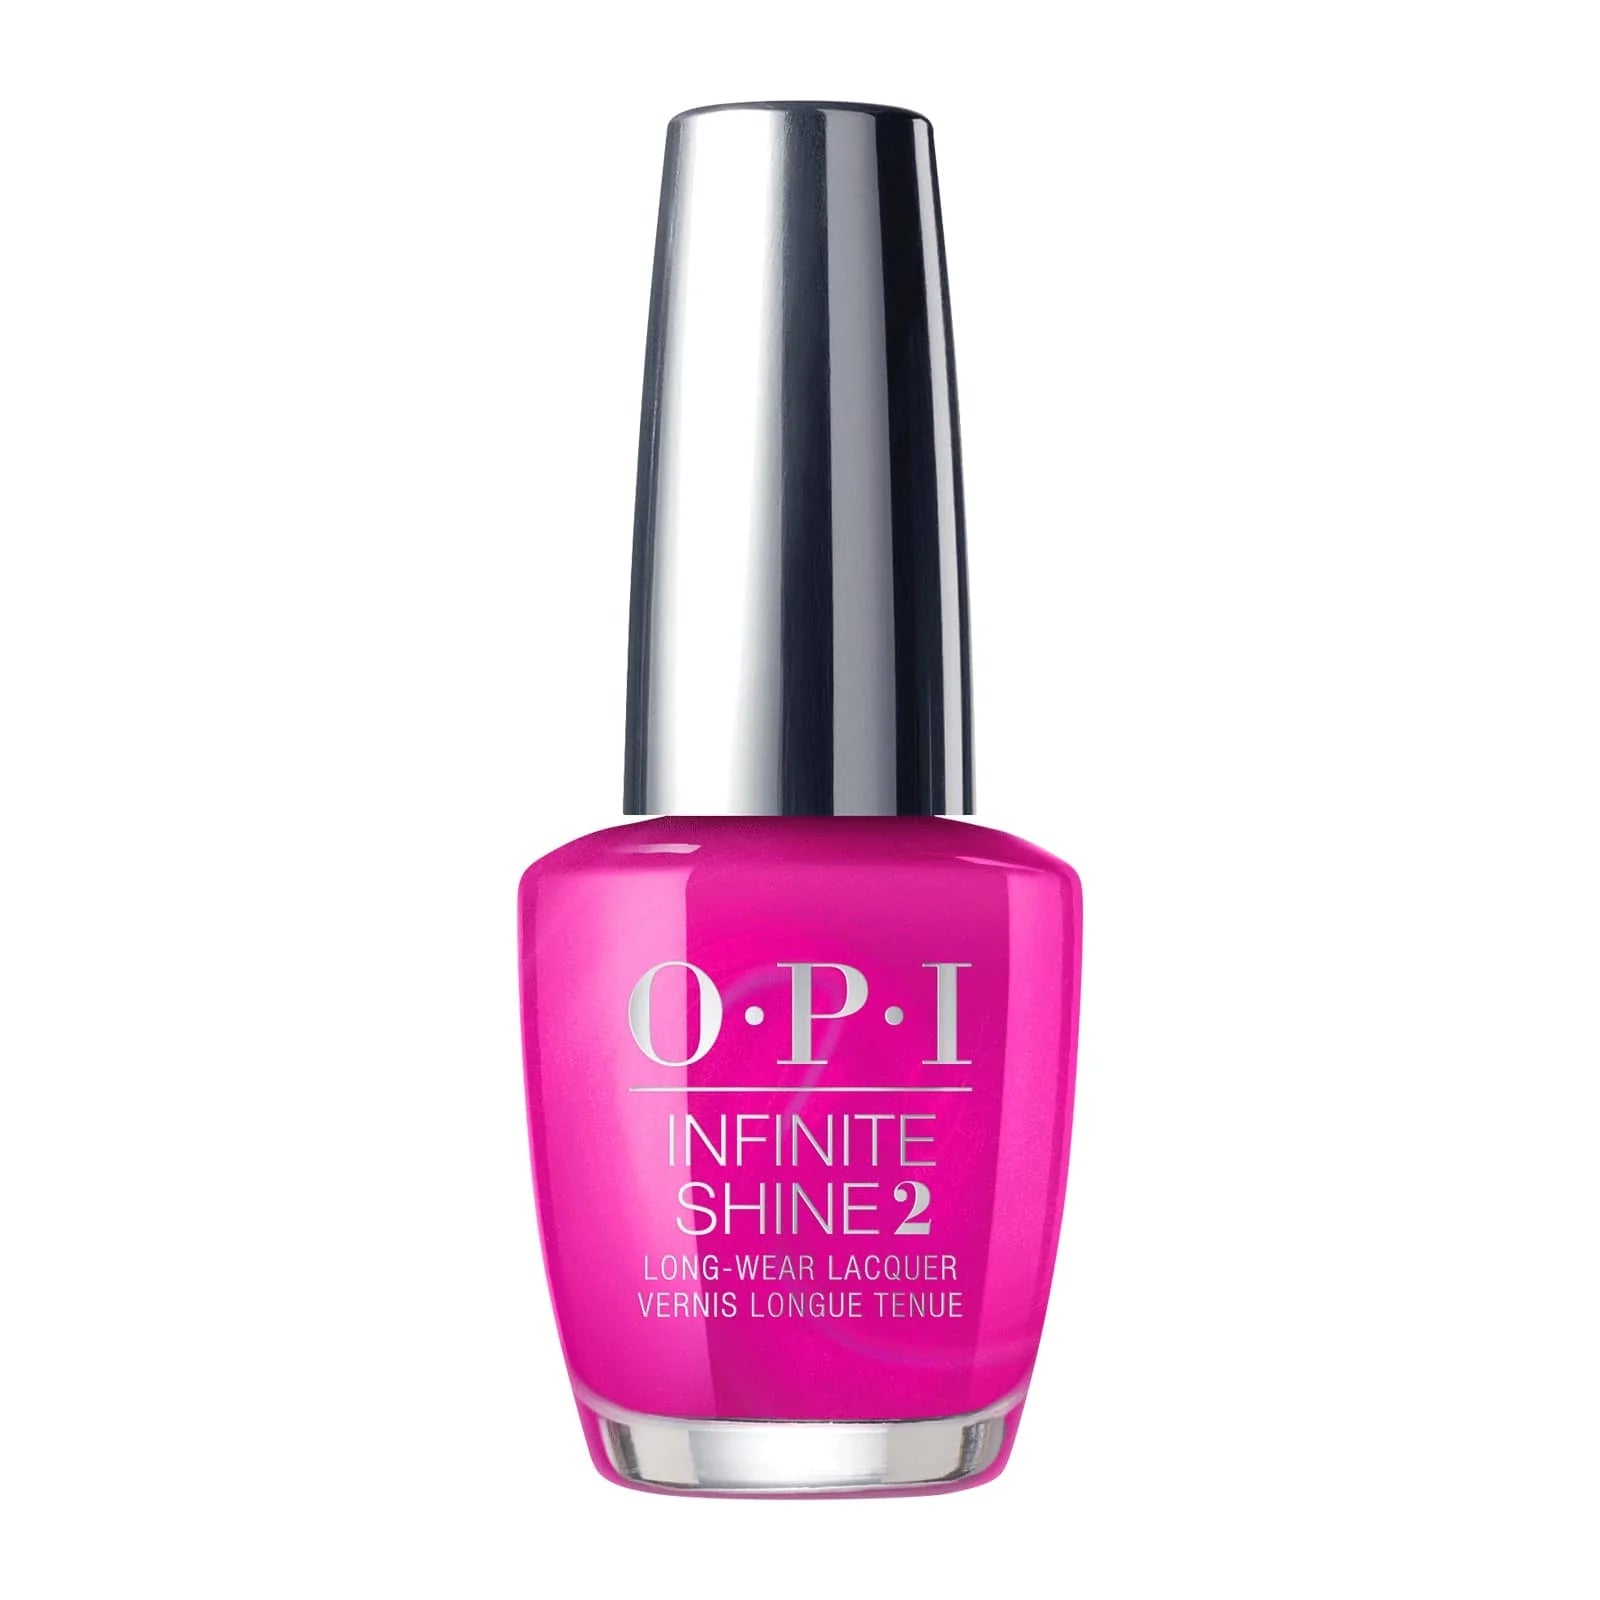 O.P.I Nail Lacquer - All Your Dreams in Vending Machines